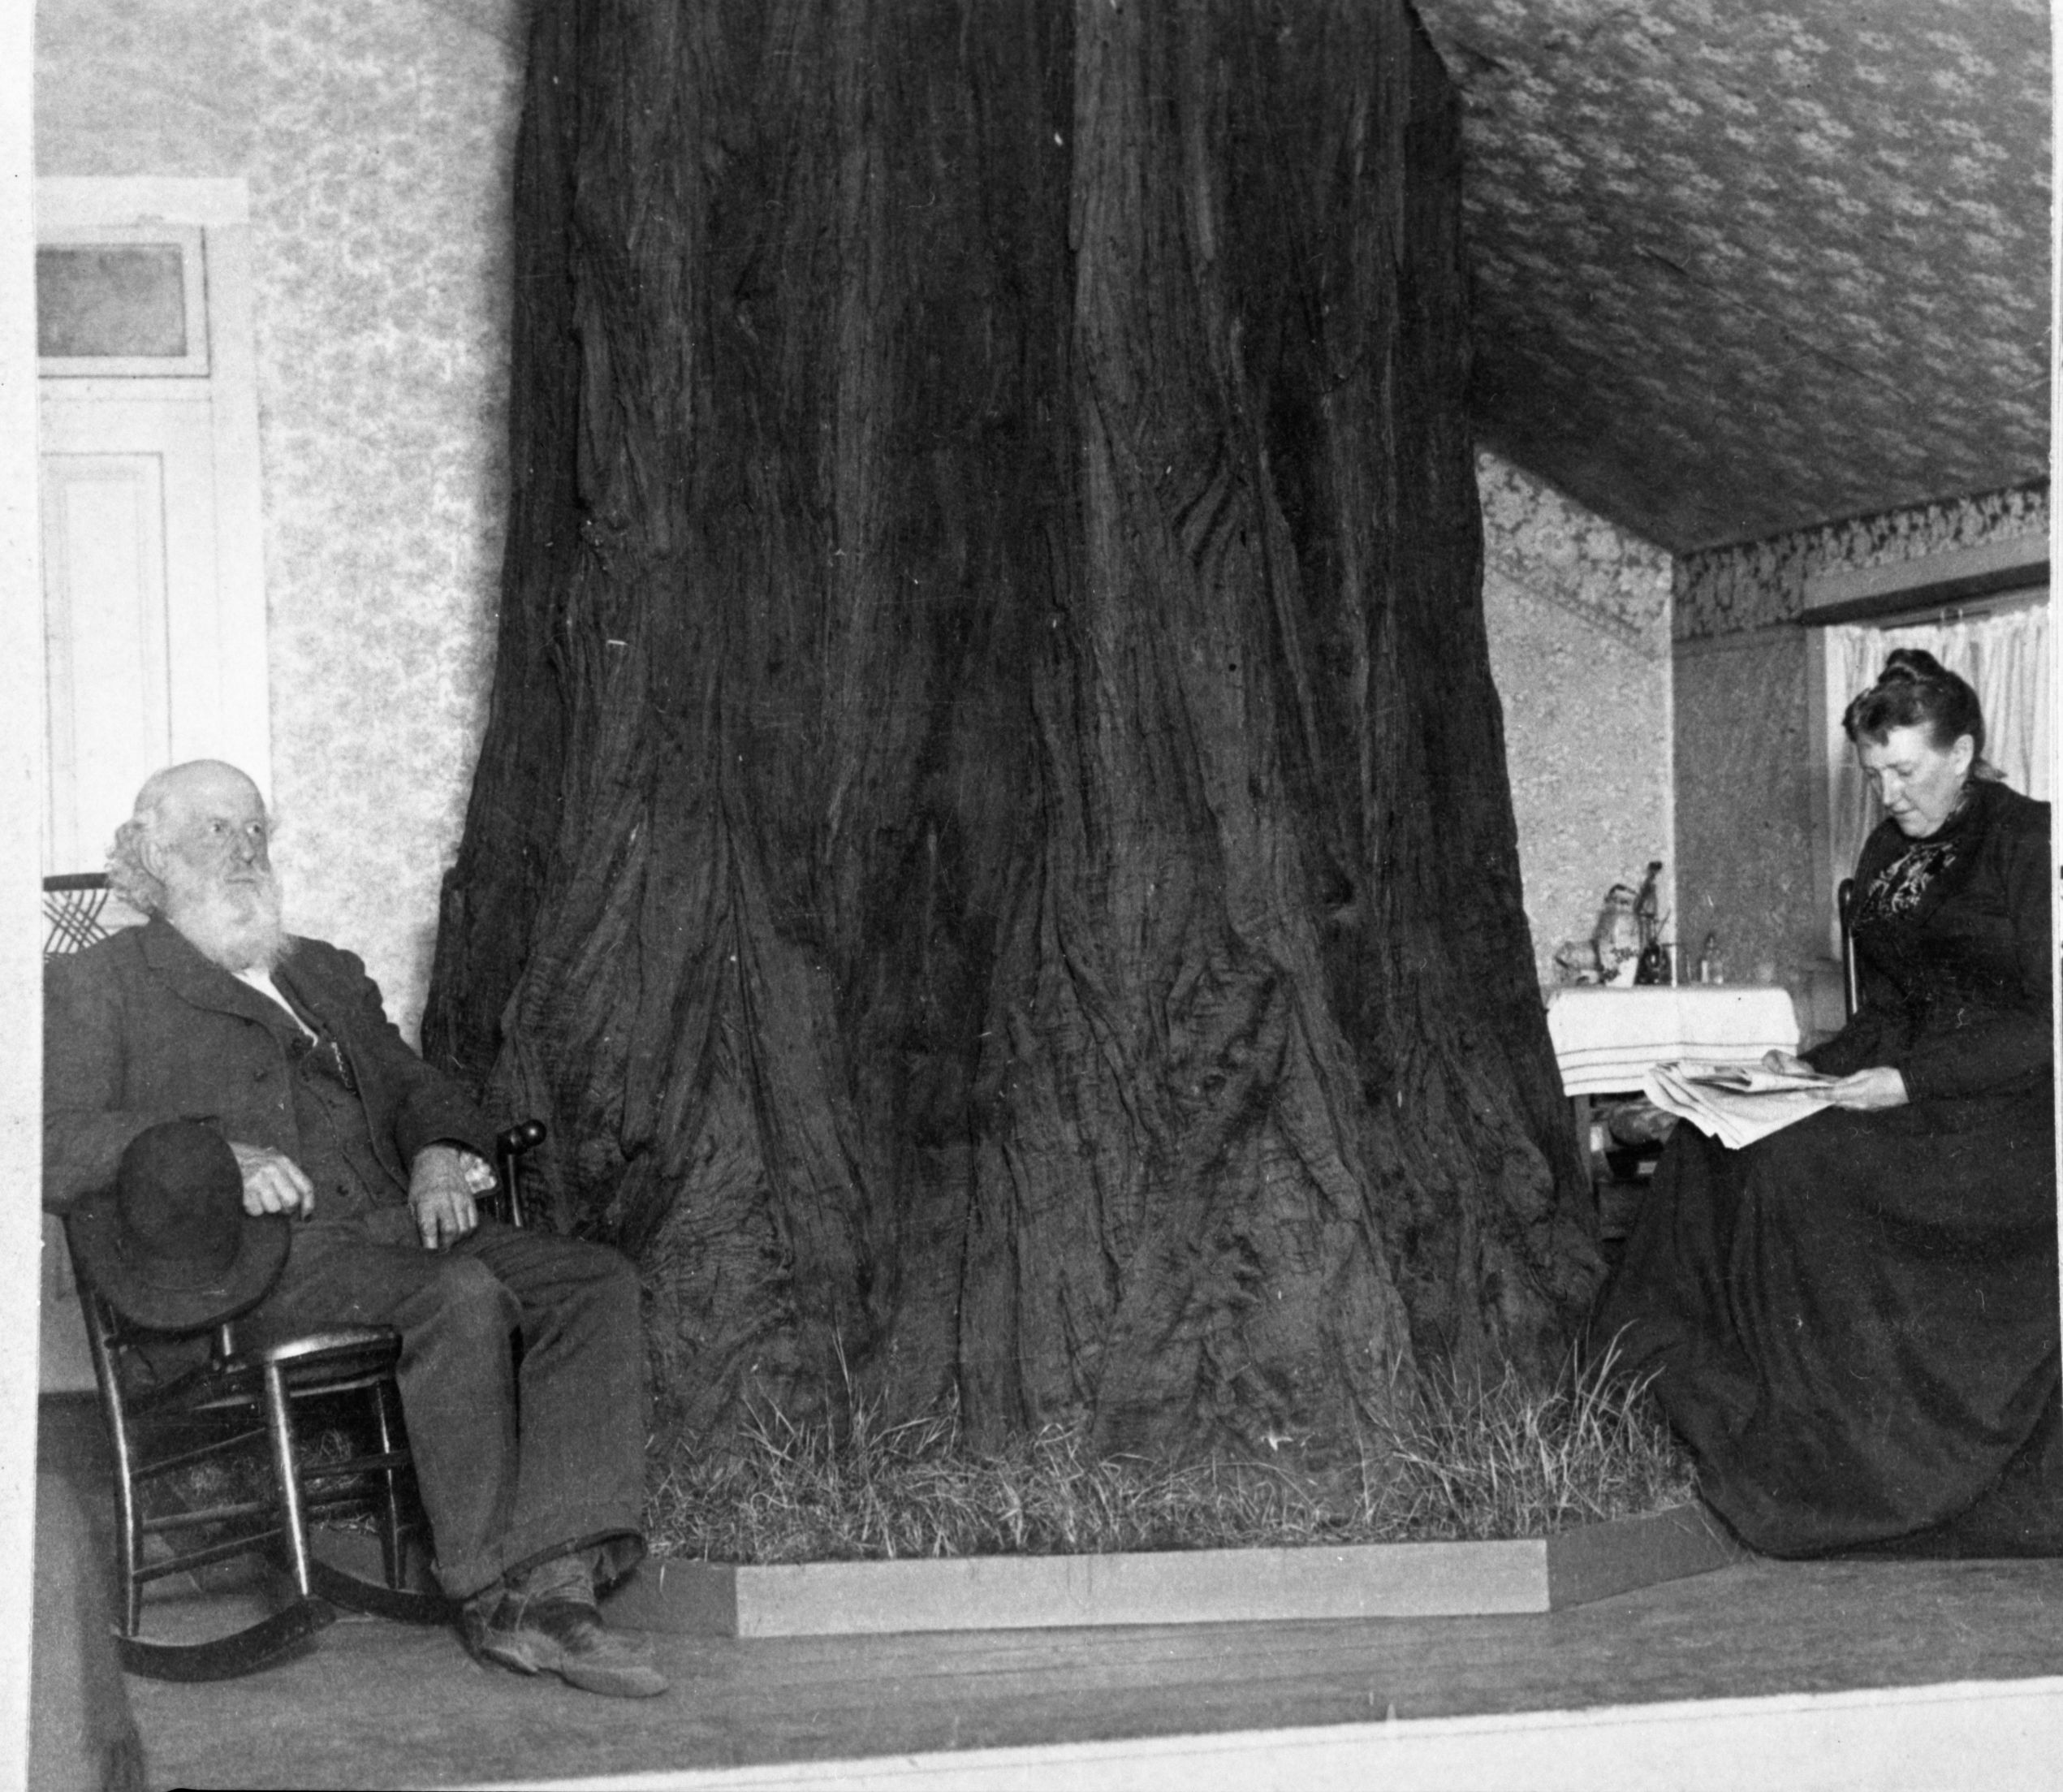 Detail of L. Smaus stereo (RL-16,504). Handwritten on back: "The Big Tree Room. First hotel in the Yosemite Valley, Cal. House built around a tree." Man in photo is George Fiske. copied by Michael Dixon, copied July 1985